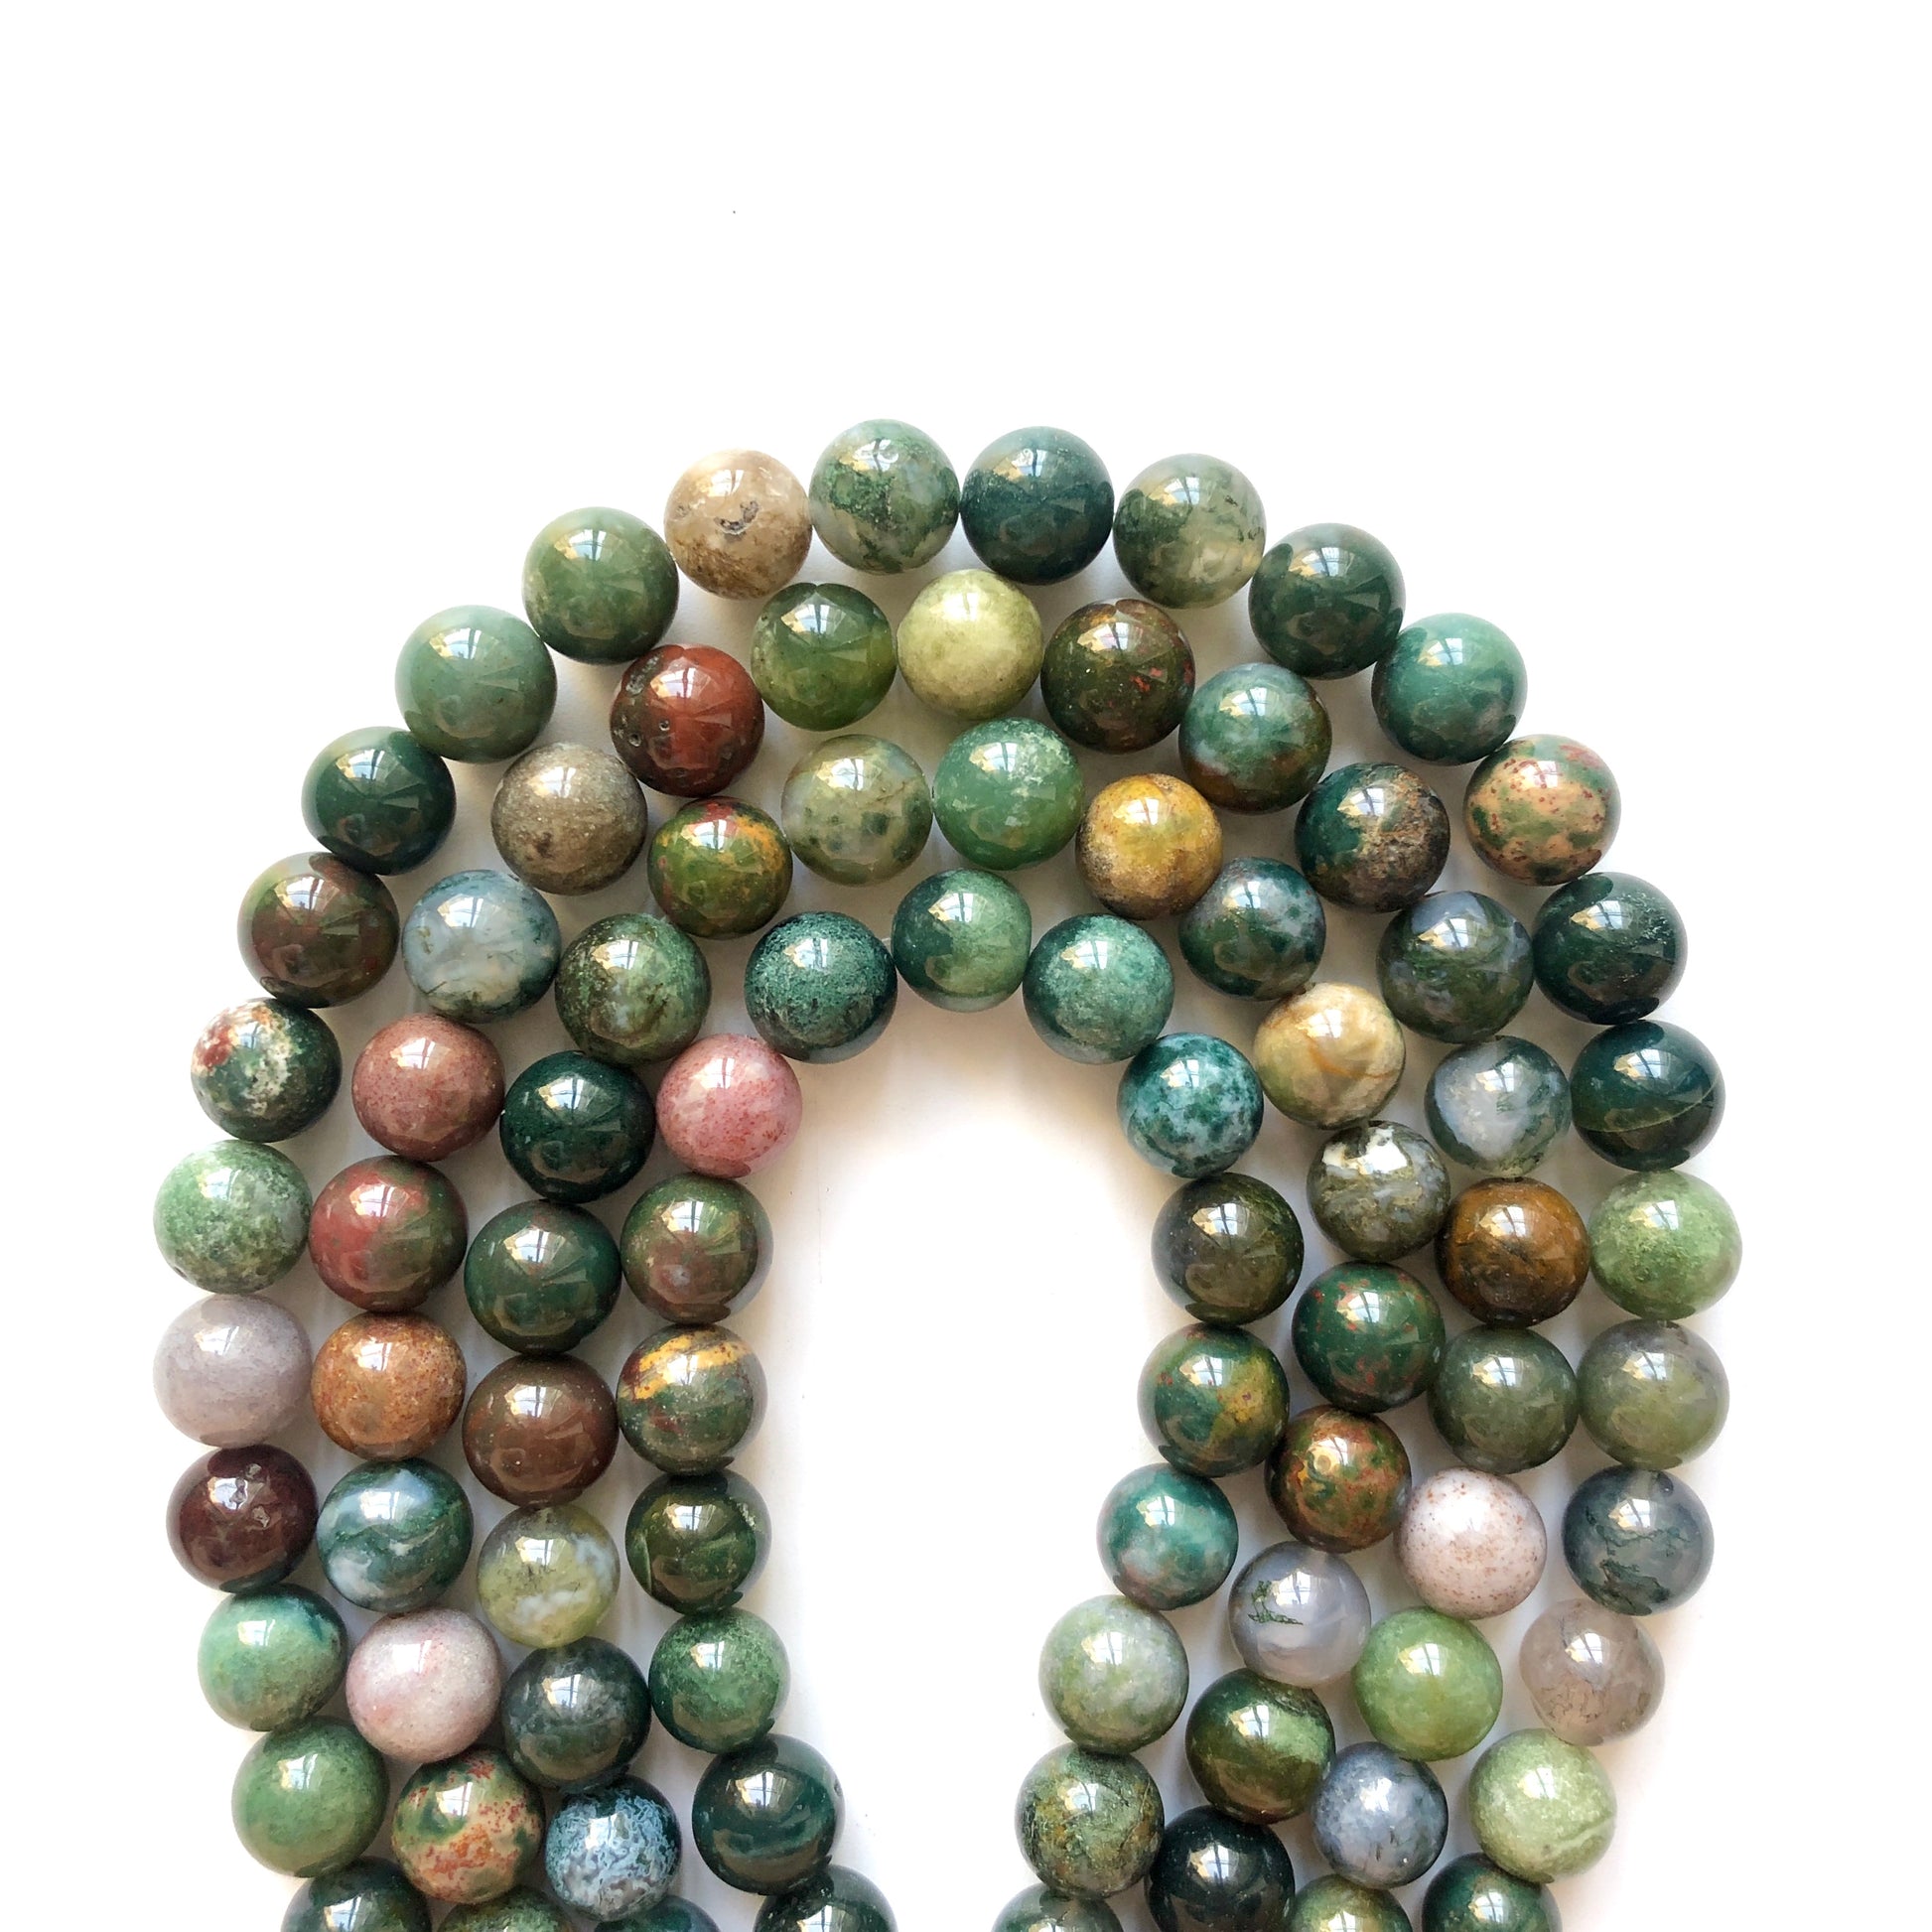 2 Strands/lot 10mm Indian Agate Round Stone Beads Stone Beads Other Stone Beads Charms Beads Beyond